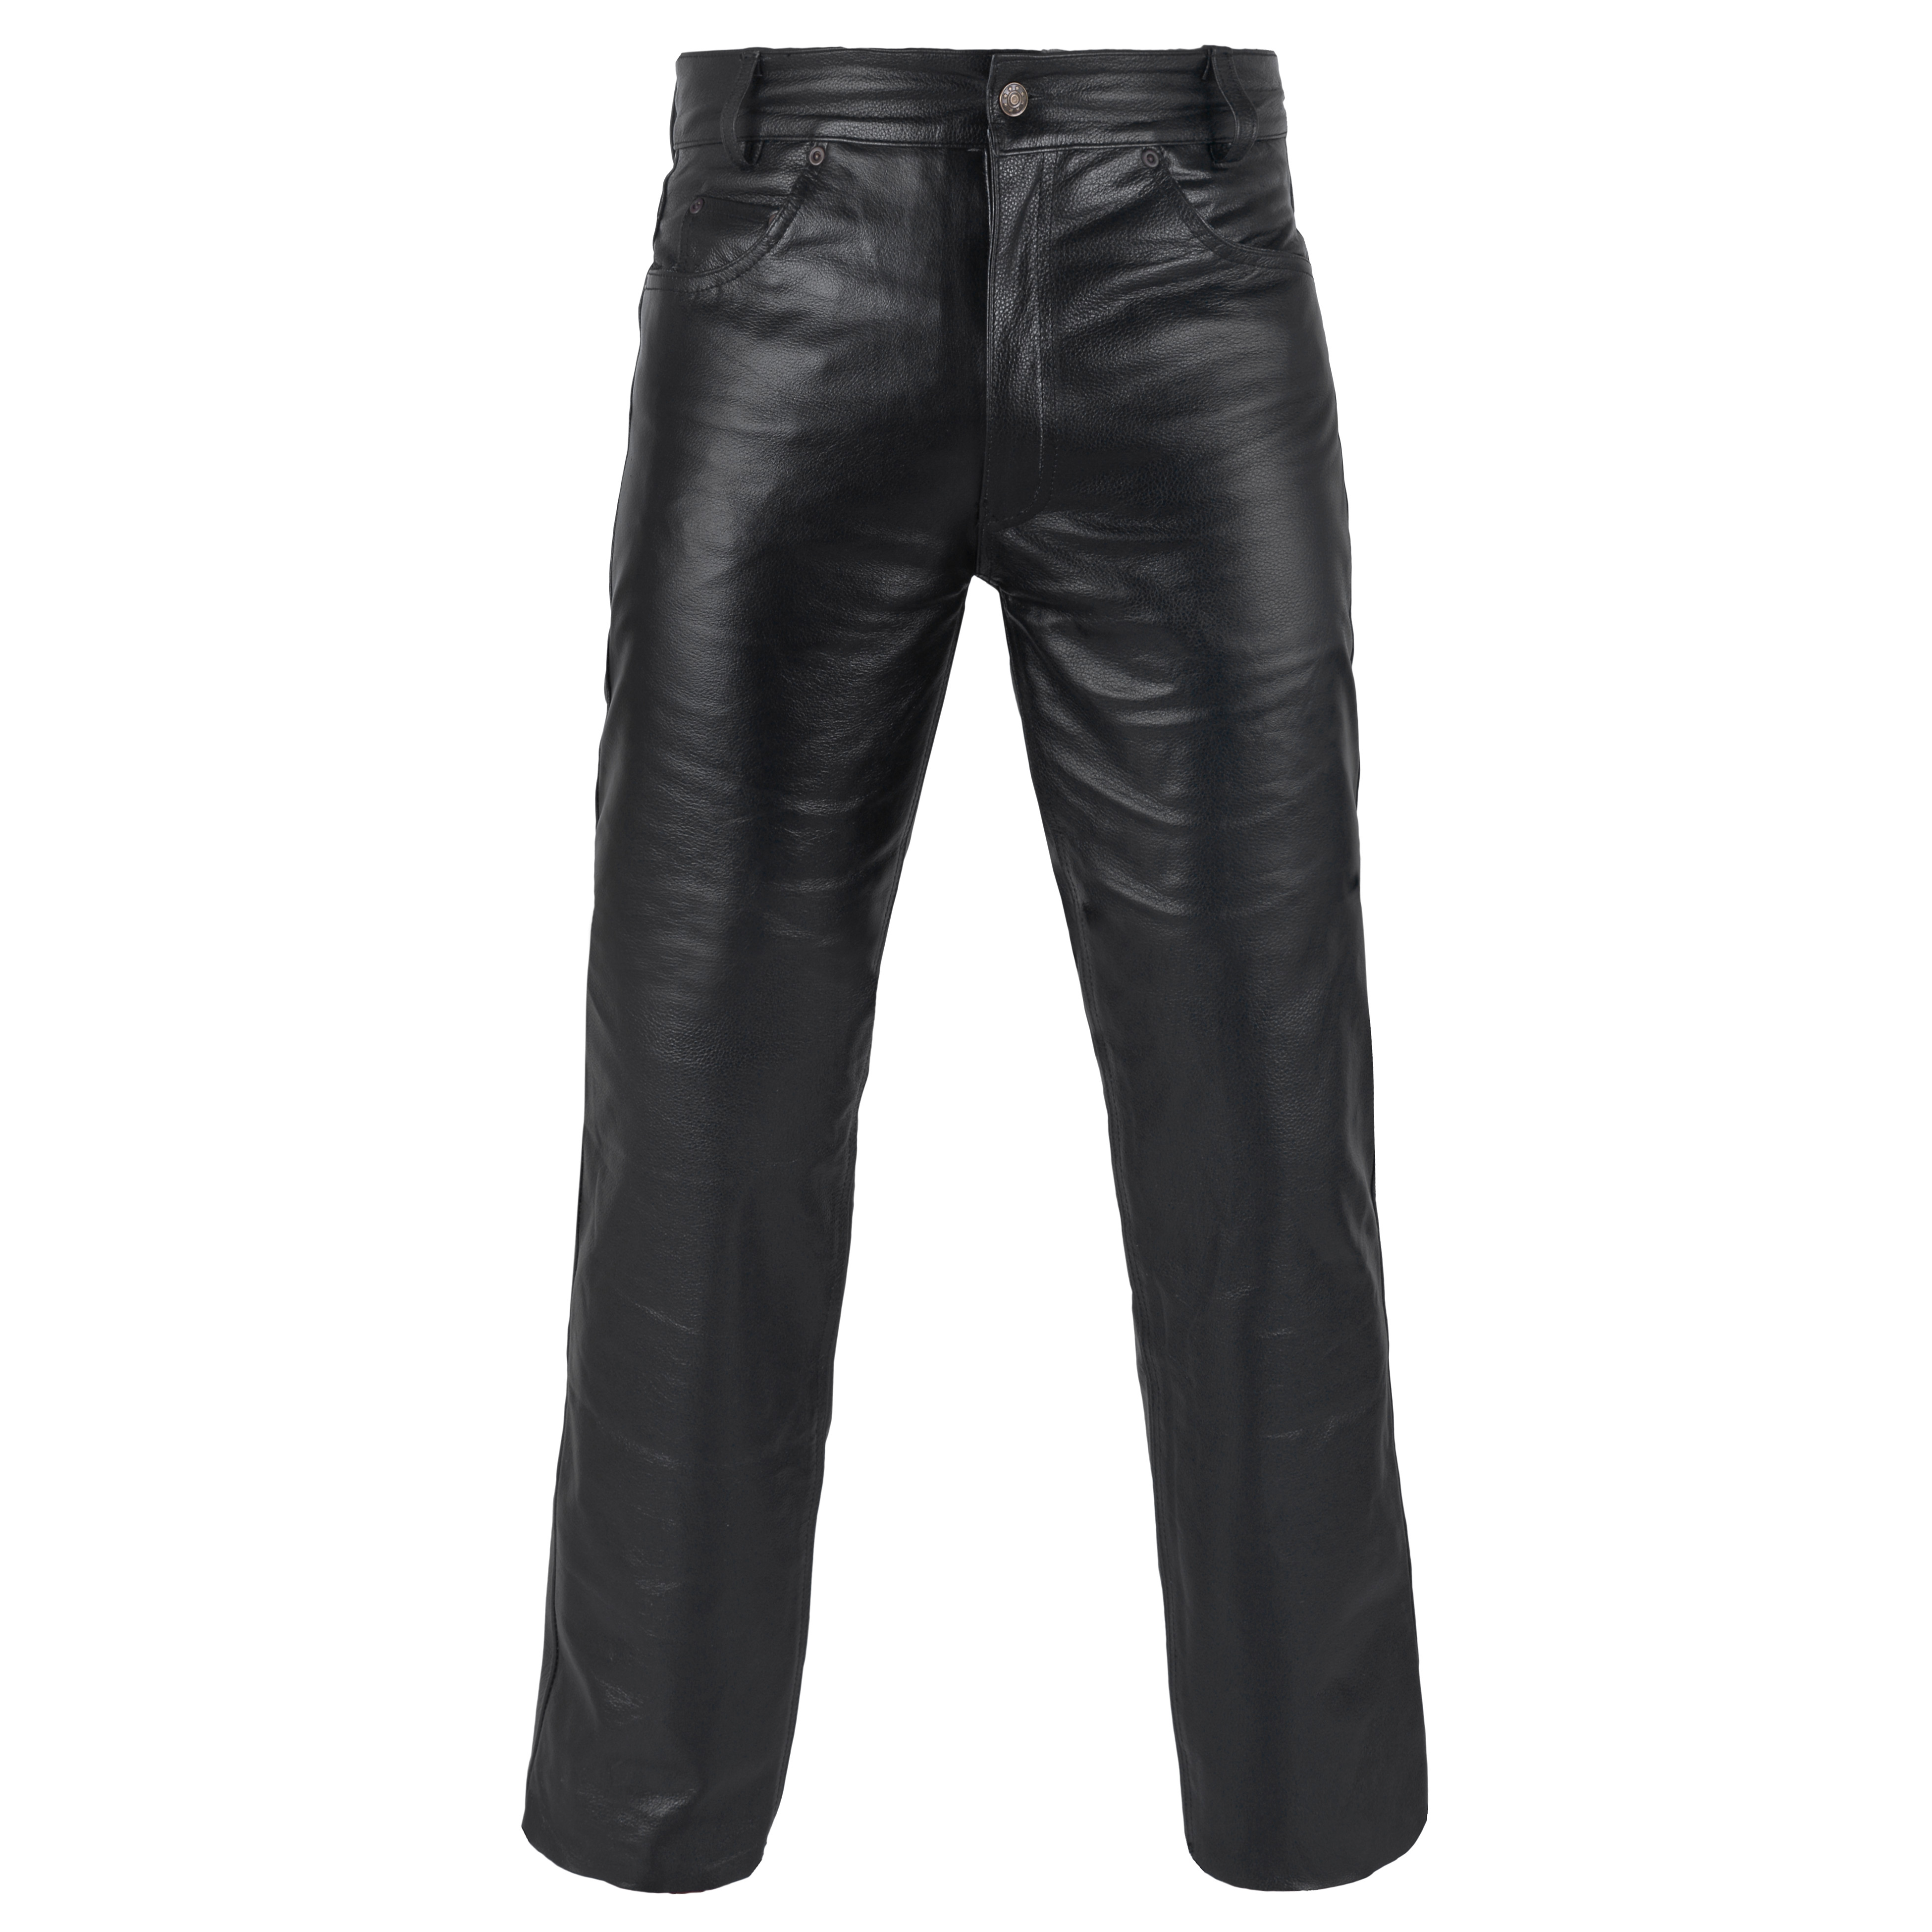 Motorbike Leather Pant Jeans Style